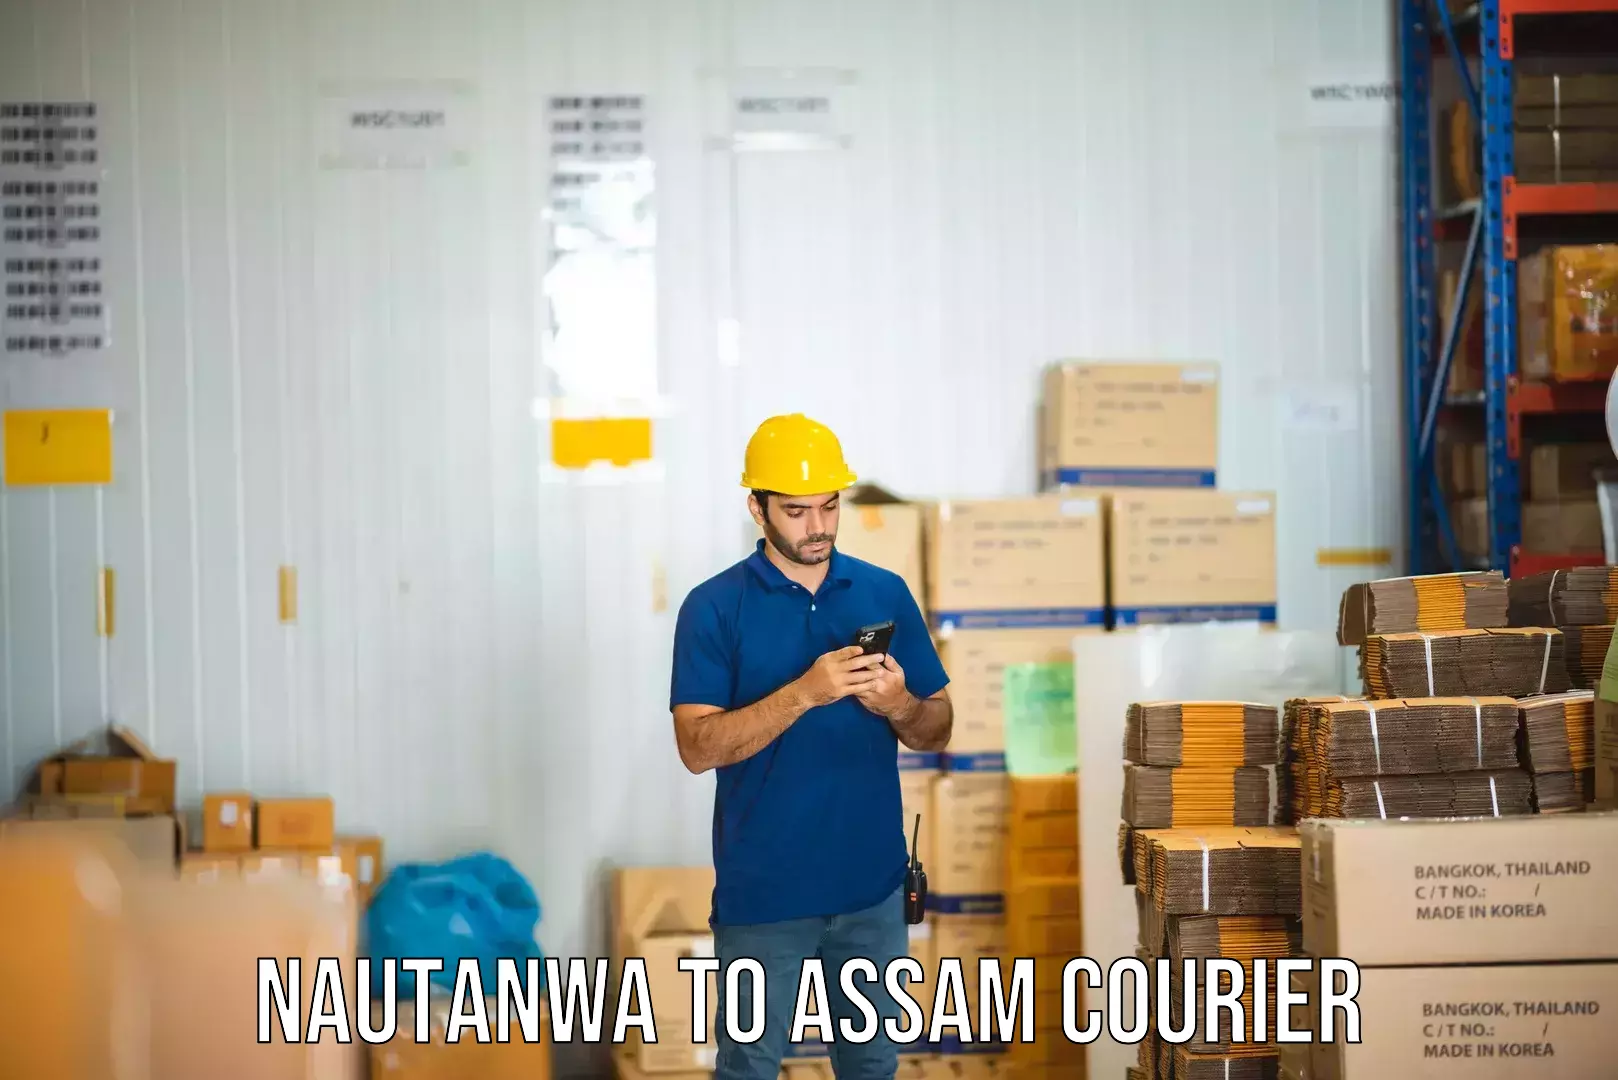 End-to-end delivery Nautanwa to Assam